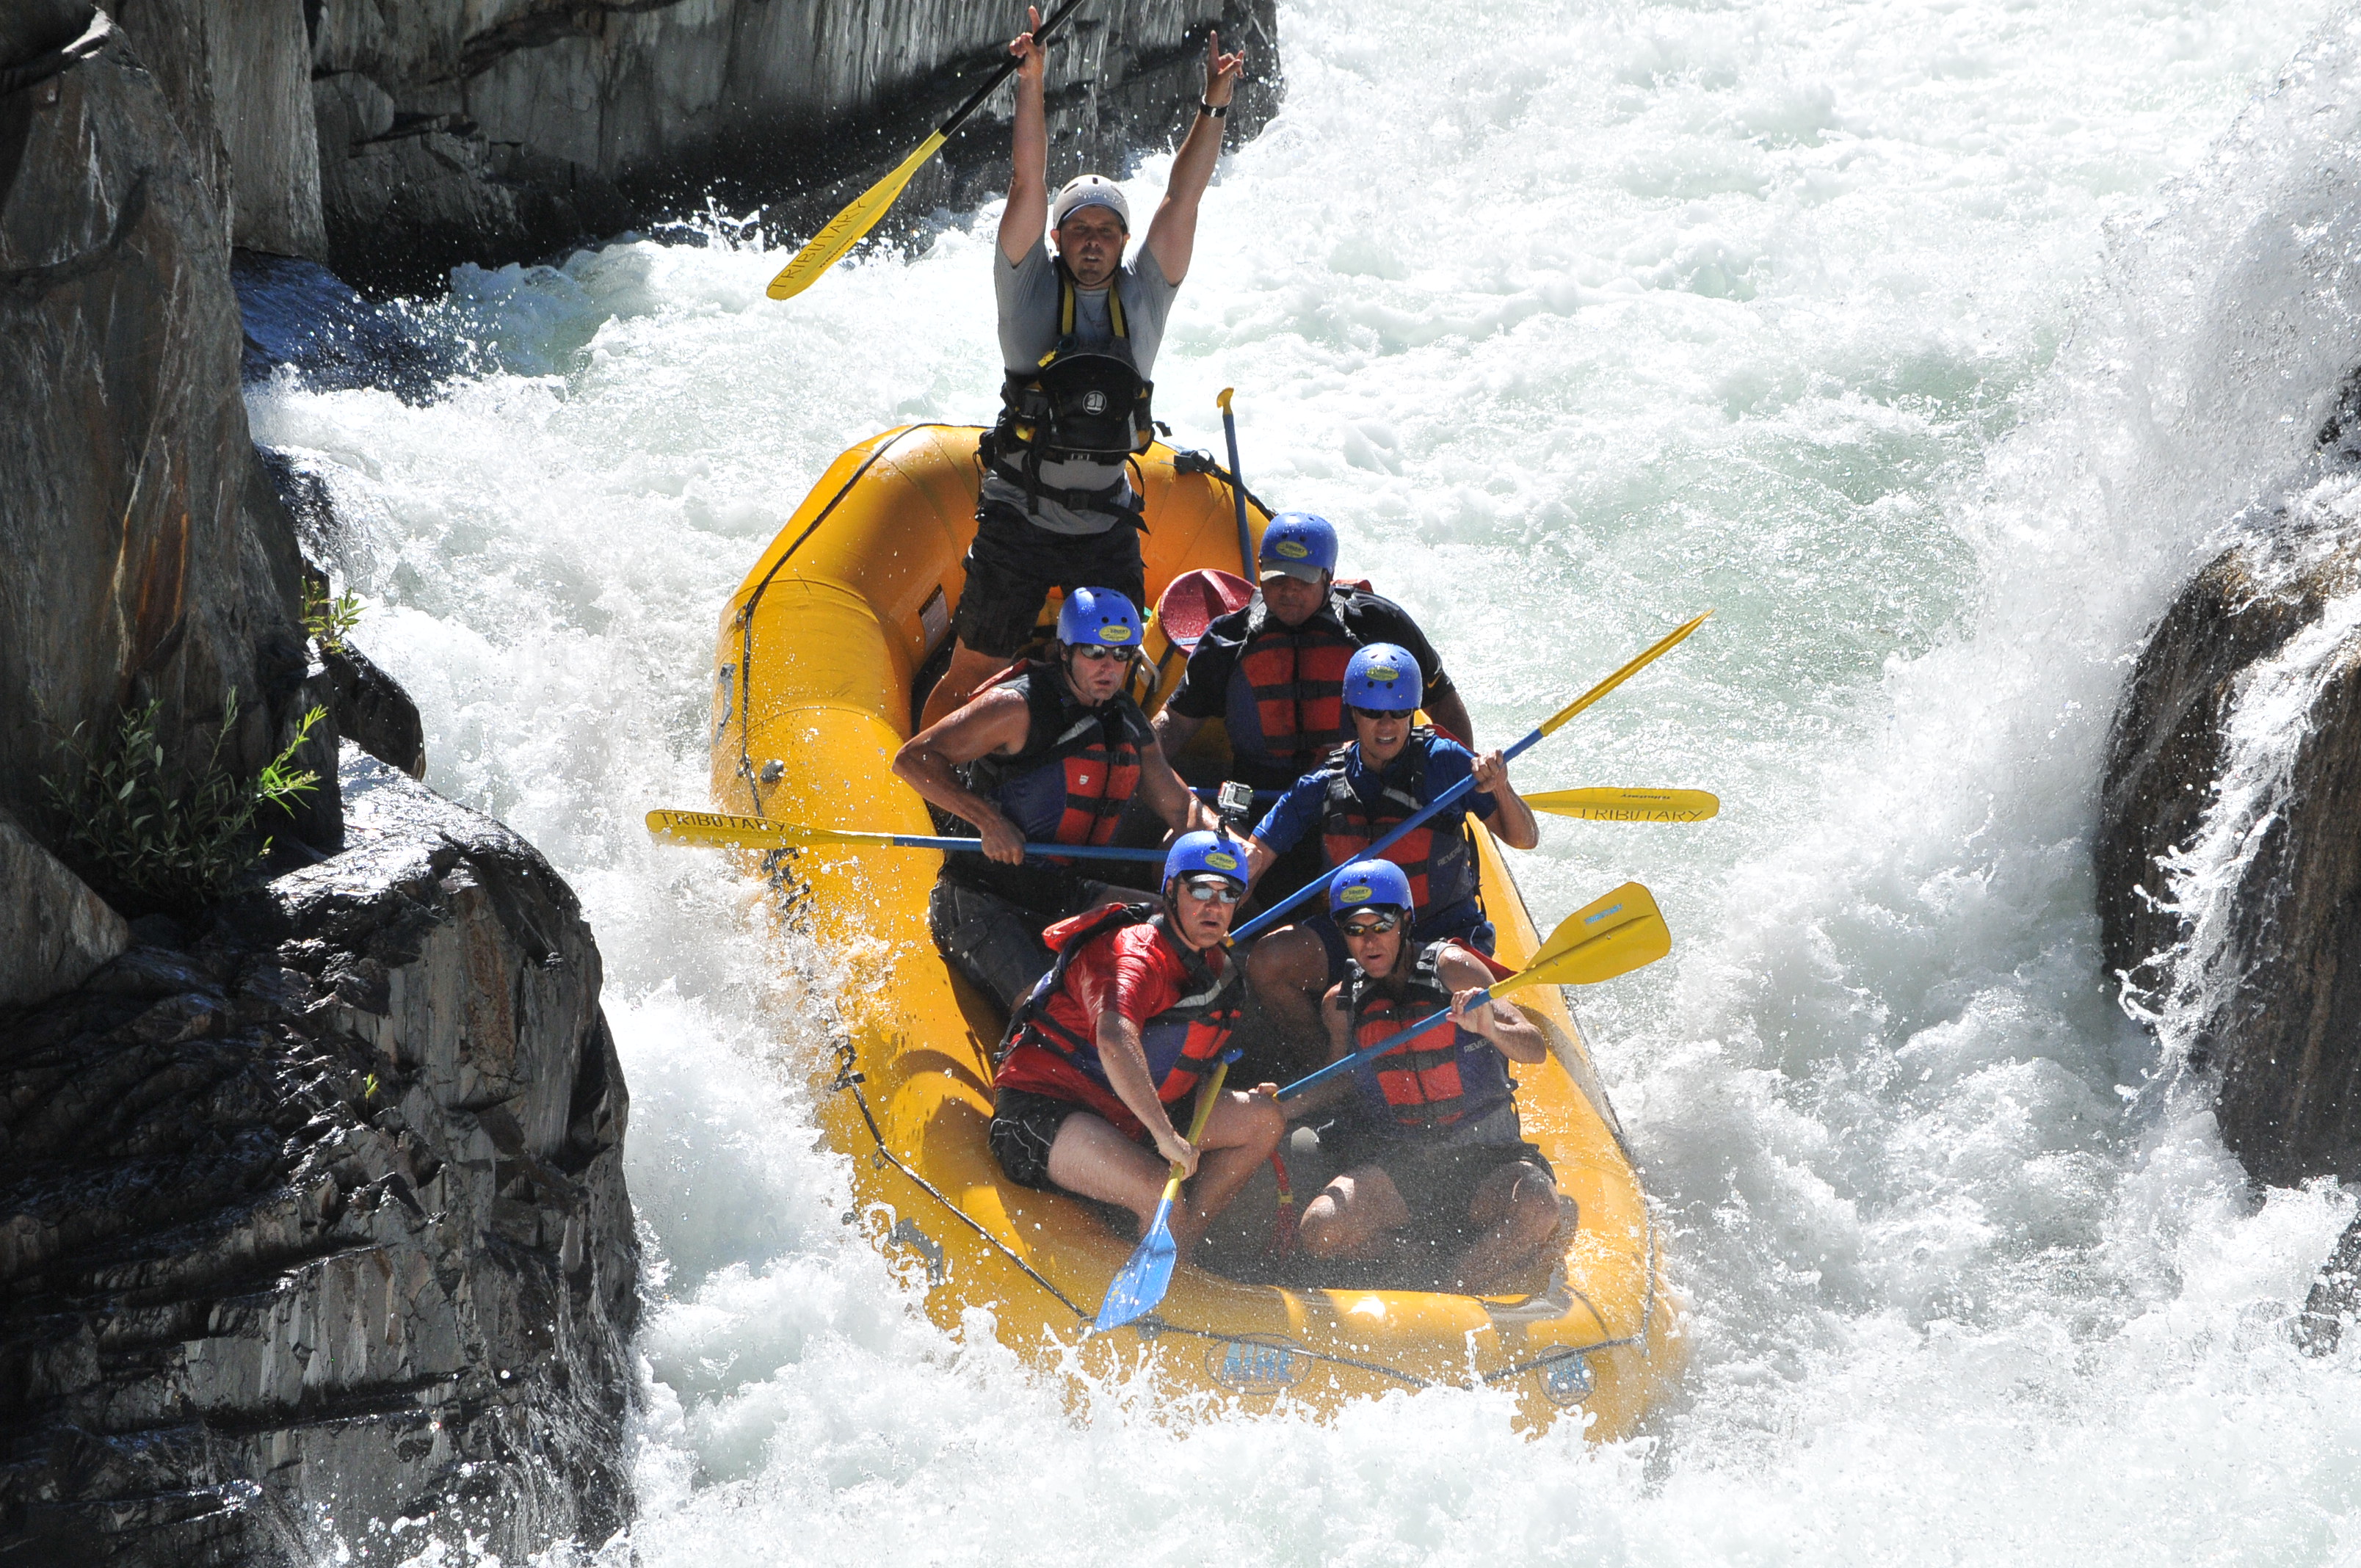 Rafting the Middle Fork of the American River